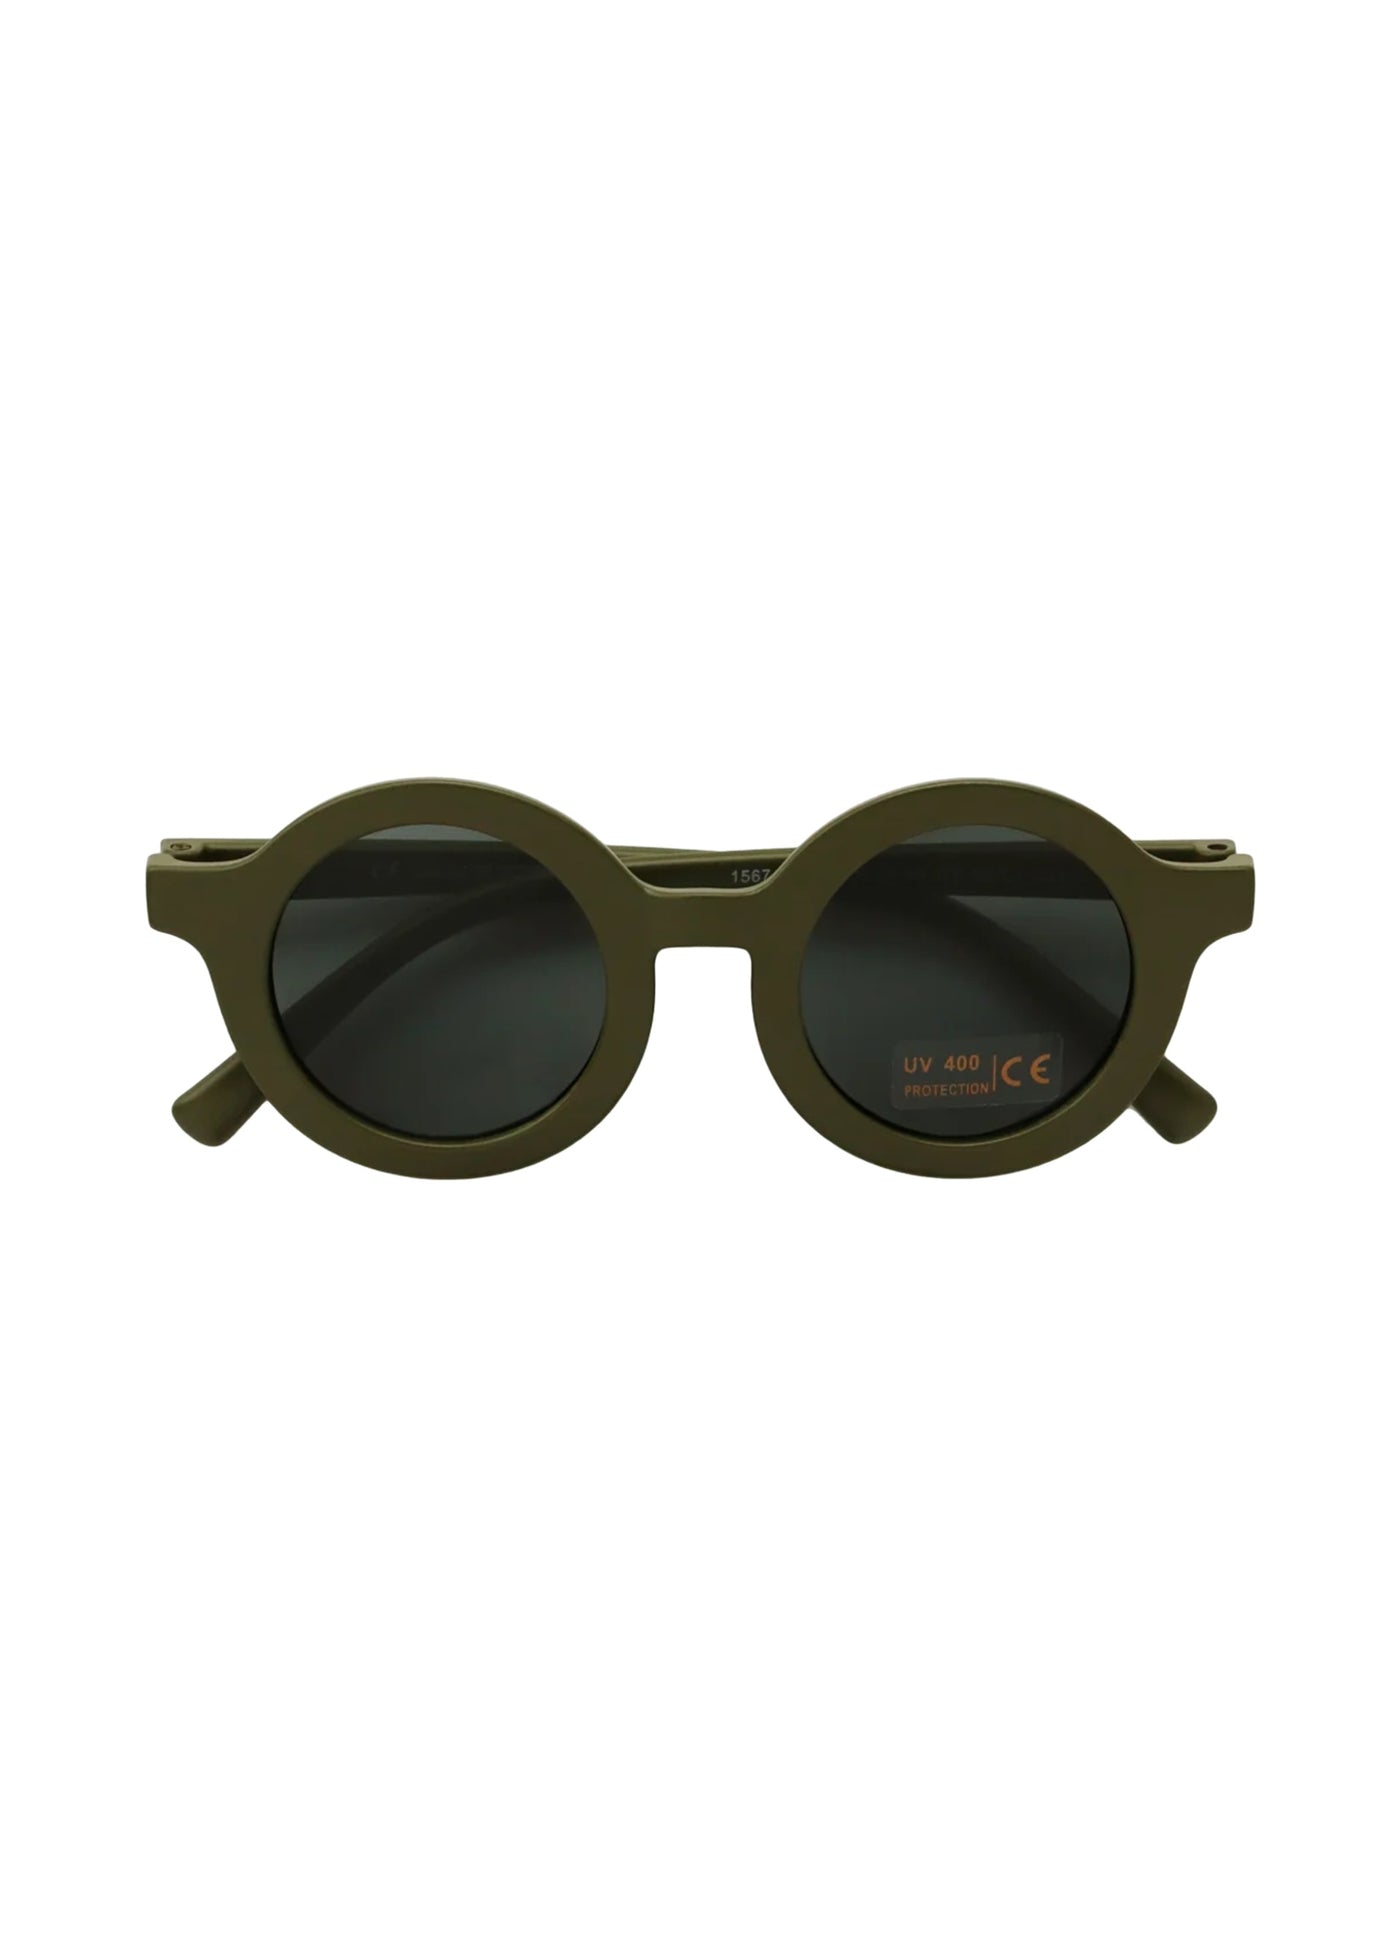 Your Wishes - Saron | Boys Sunglasses - Drie Herb